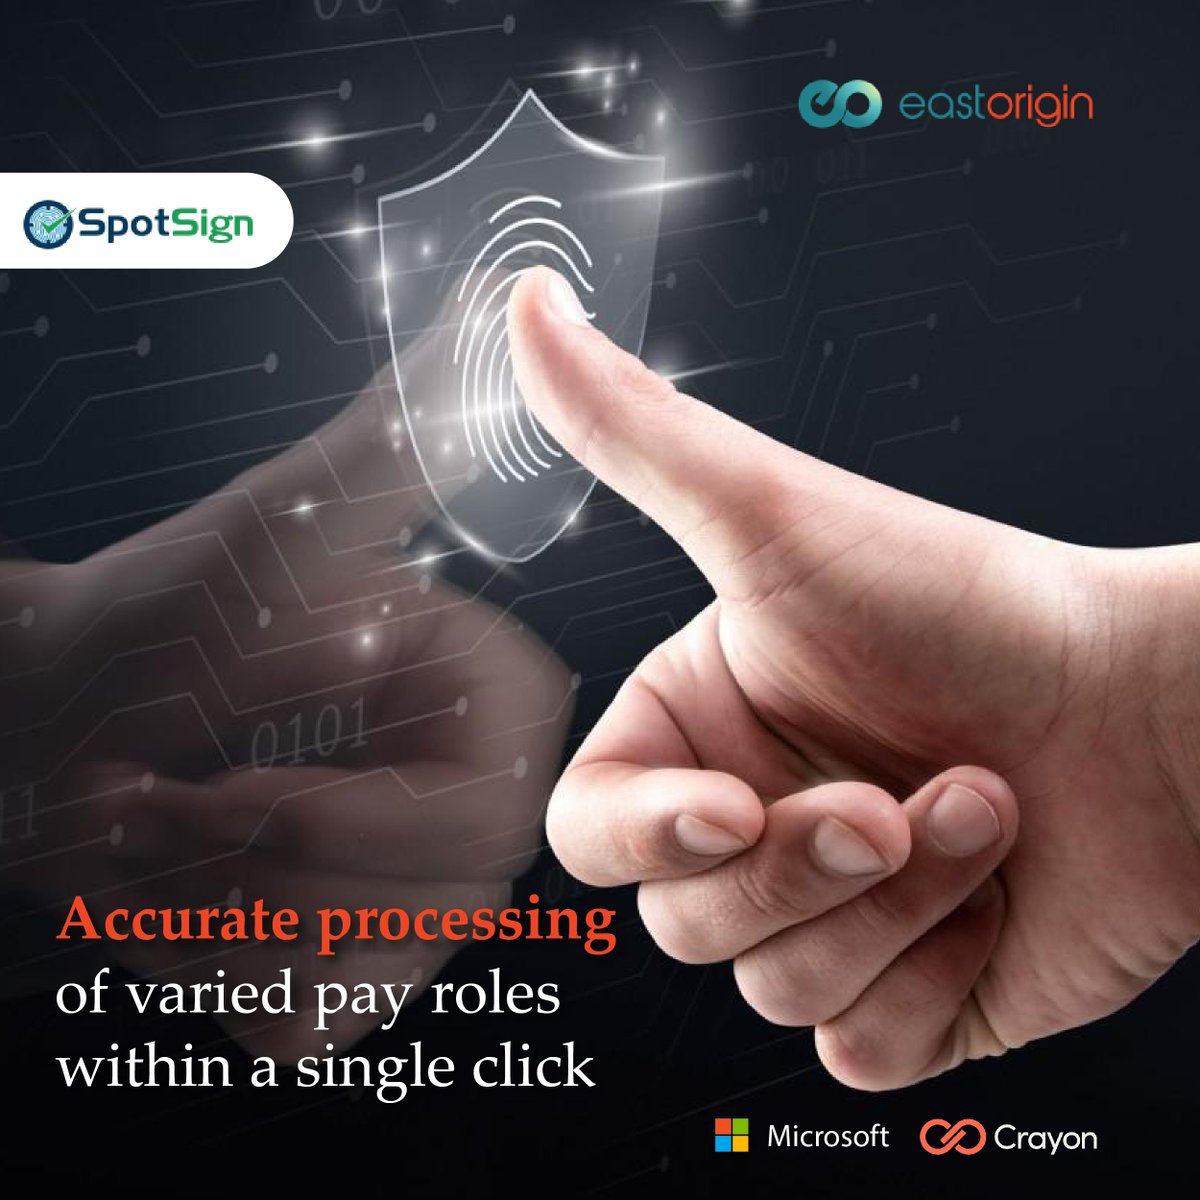 Track Attendance, eliminate errors. SpotSign: Real-time data & secure, tamper-proof tracking for peace of mind. 

To download eBook and for more information.Please Click the link Below.  
zurl.co/X3Lp   

#hr #HRManagementSystem #hrmanagementsystem
#attendencesystem